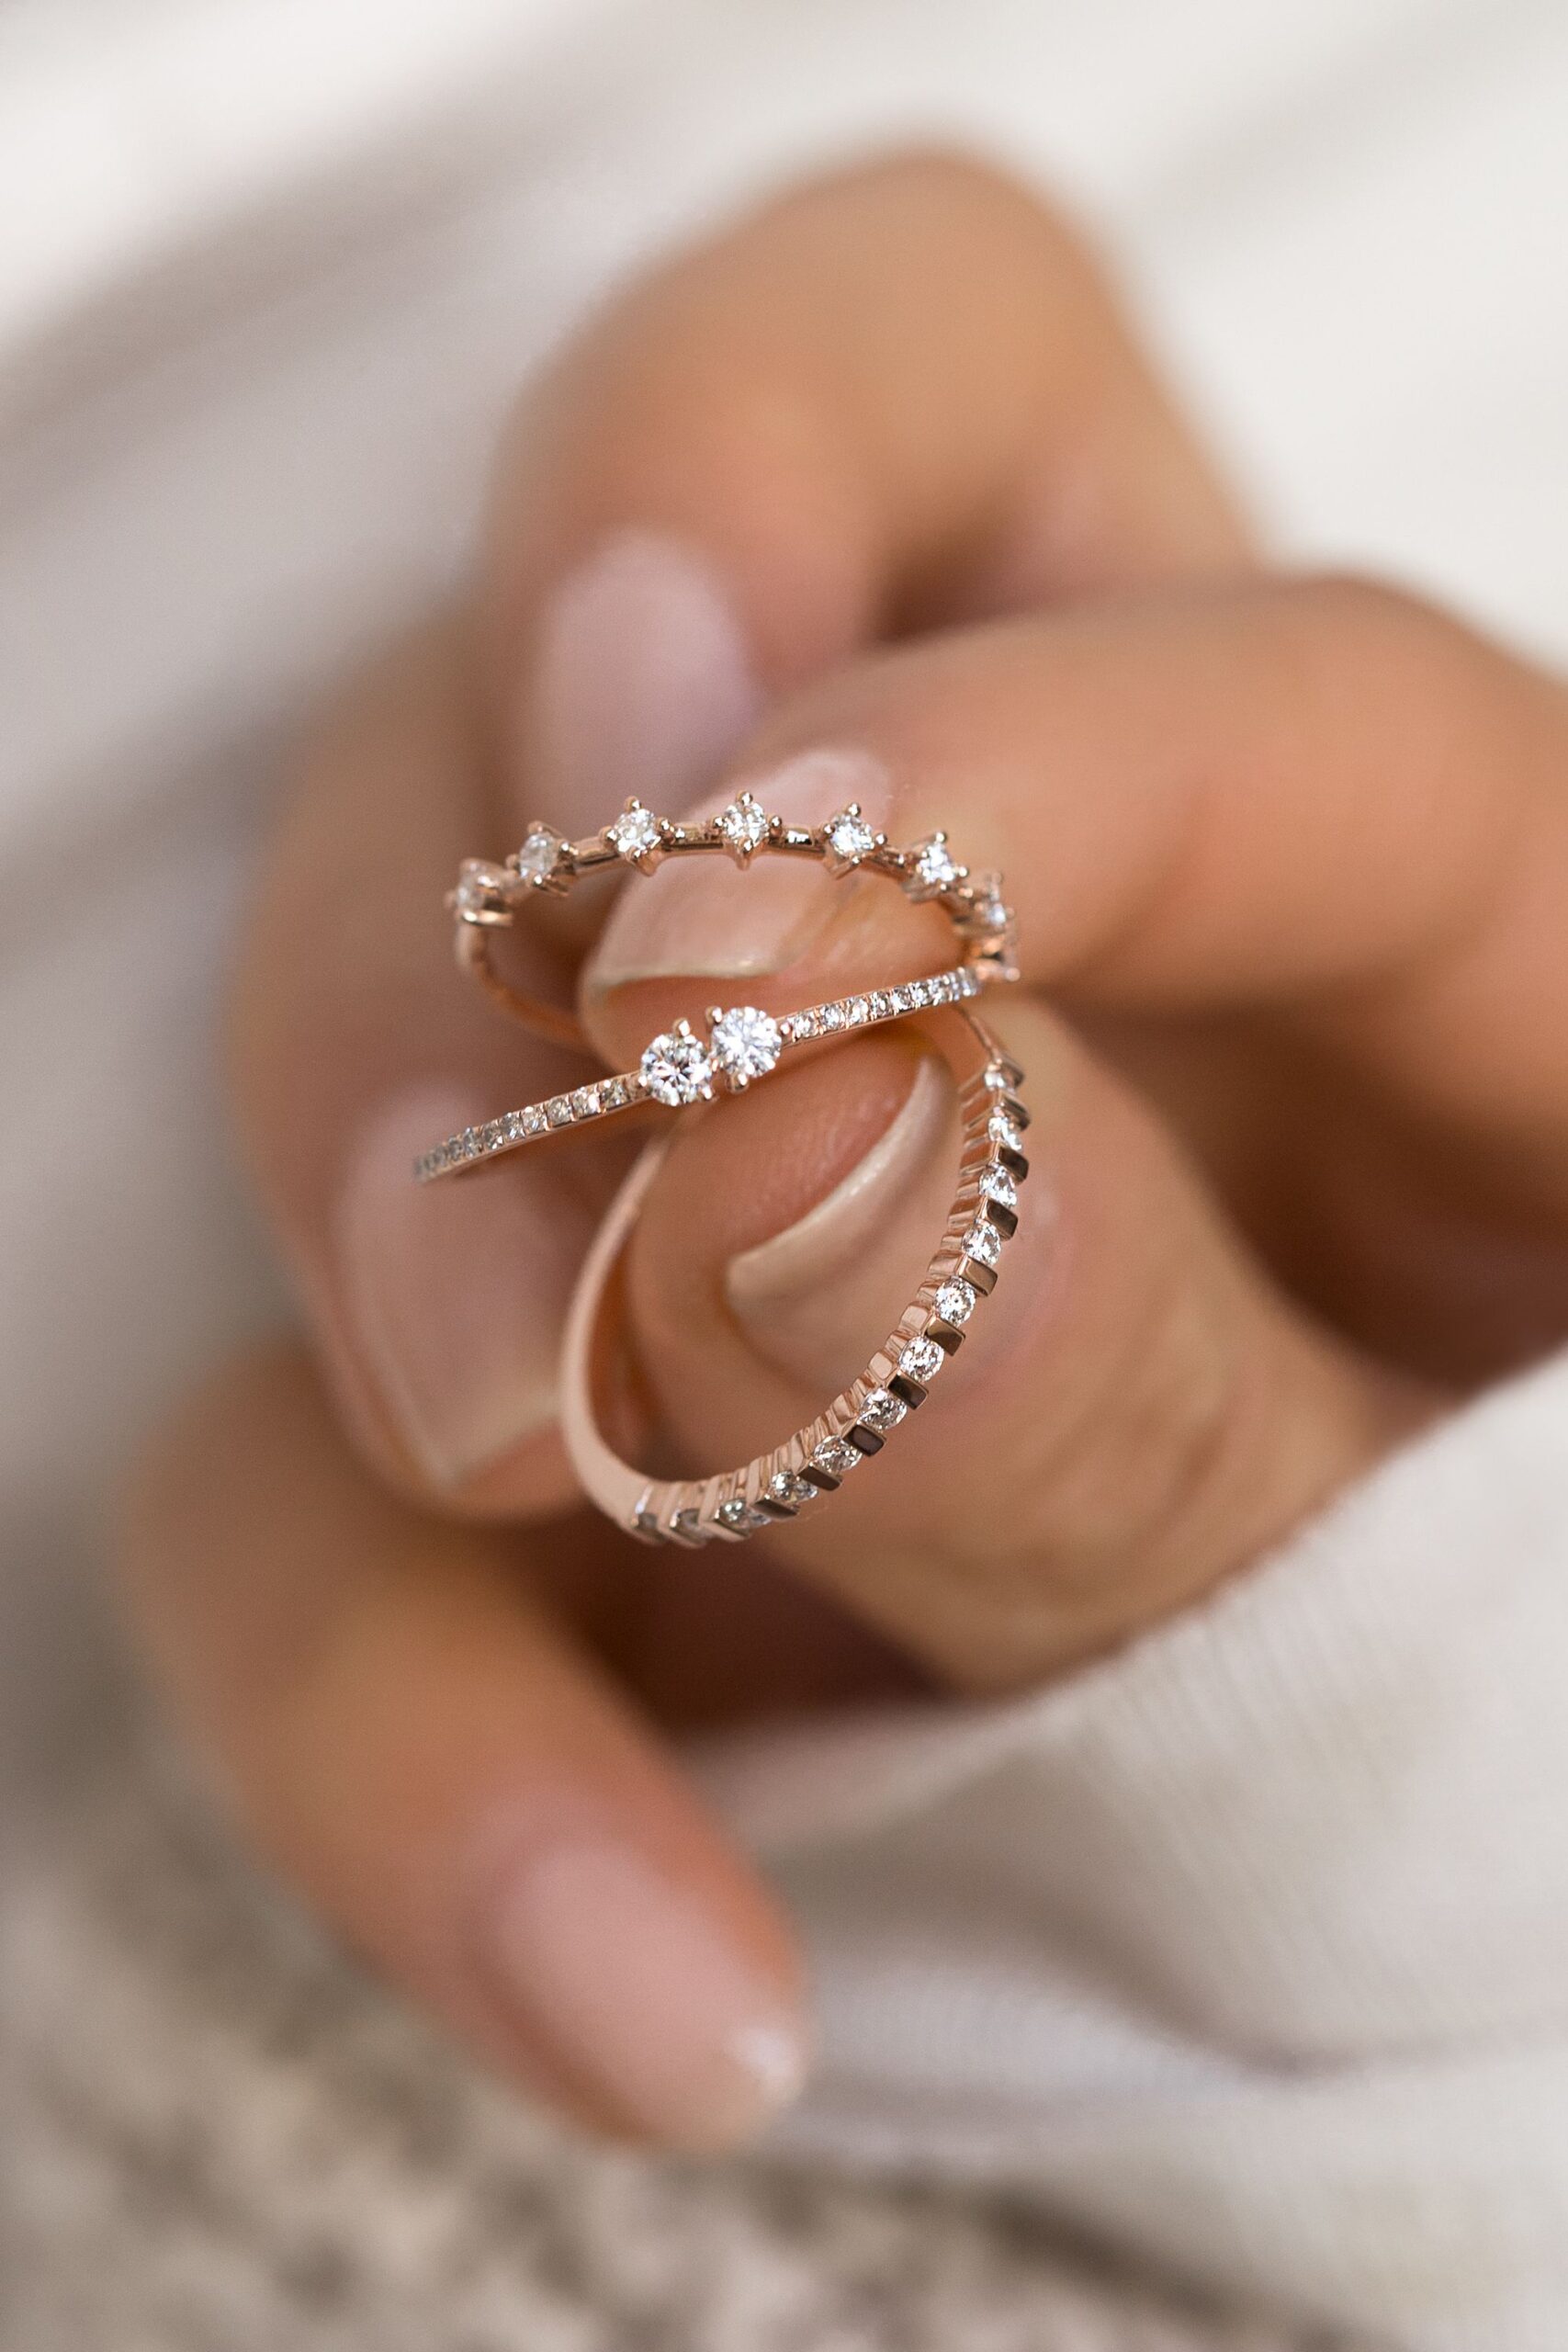 Tips to get the perfect ring jewellery